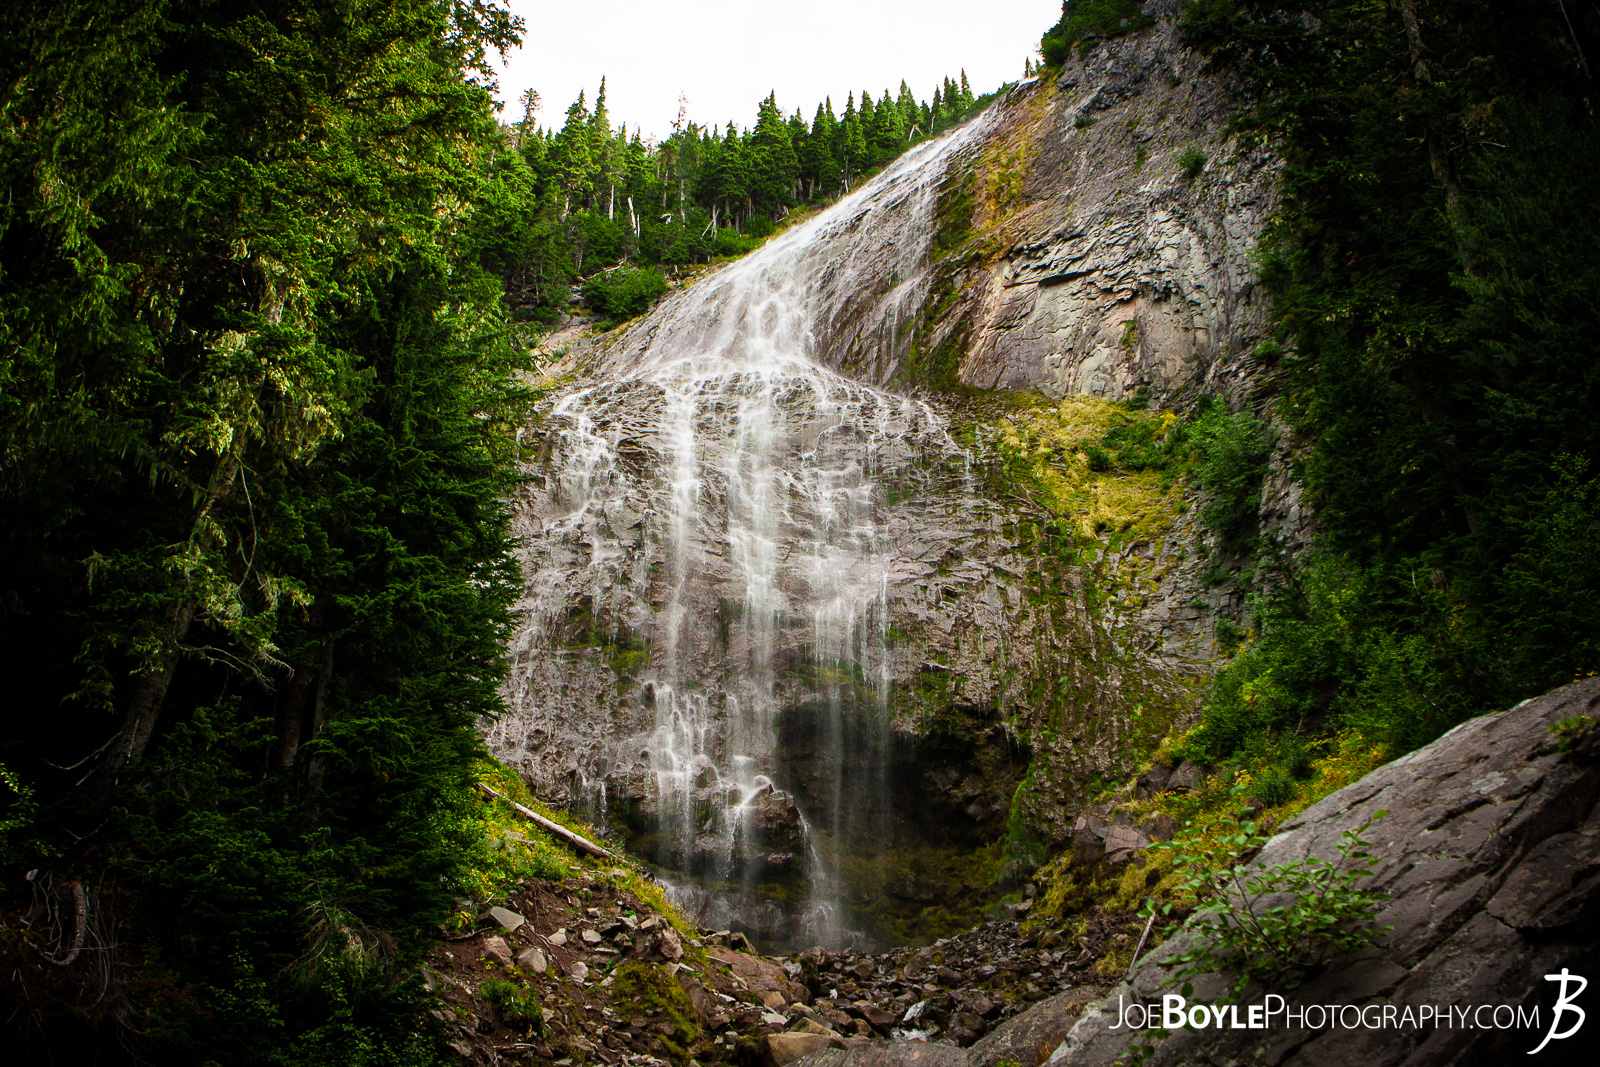  After we left Mowich Lake Campground, my buddy and I decided to take the Spray Park trail instead of the Wonderland Trail Proper. On the way we had the chance to see this spectacular Waterfall! Spray Falls is a short side-trip off of the Spray Park Trail. 